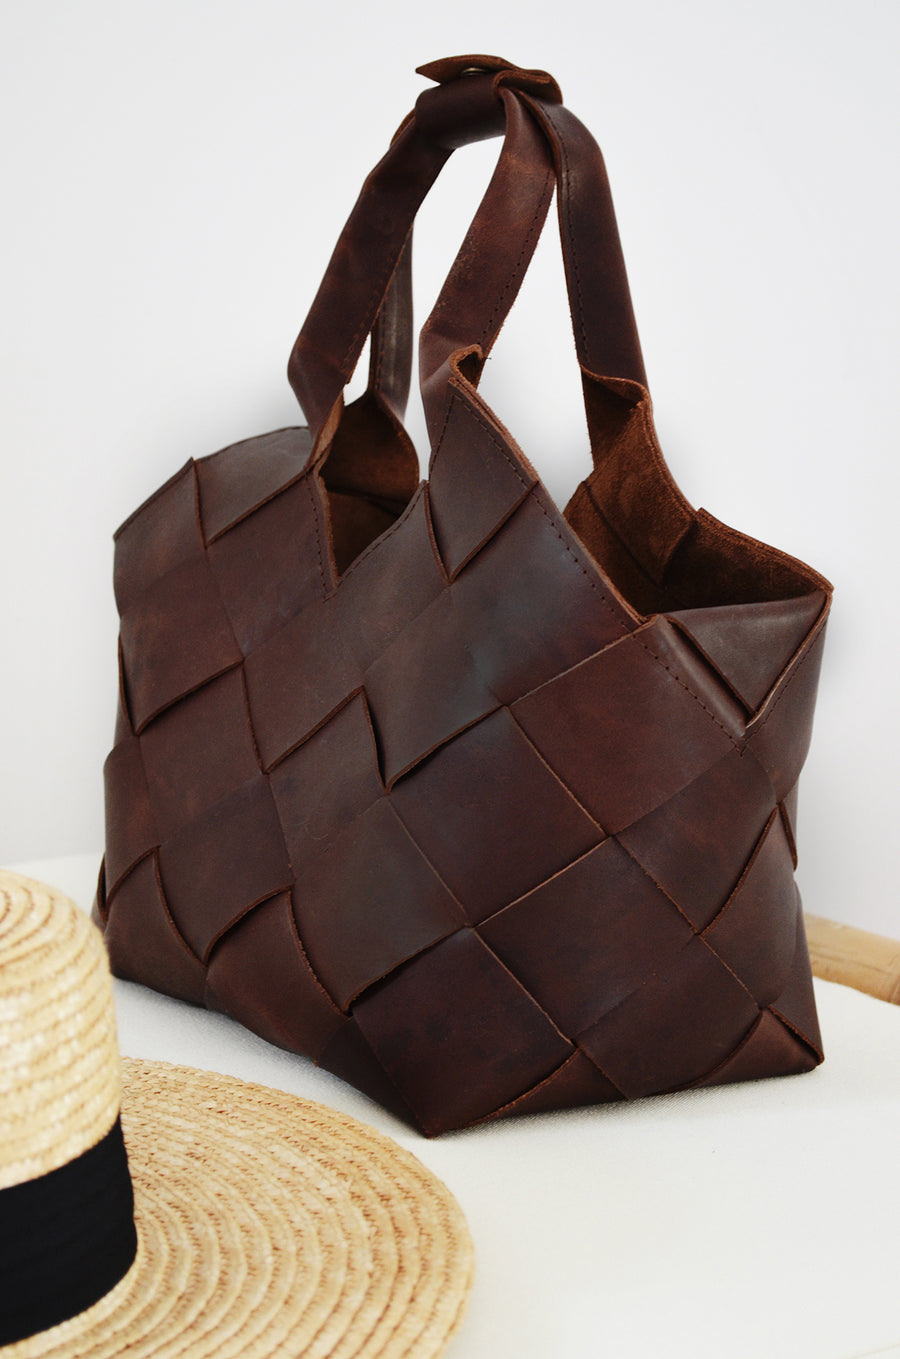 Woven Bag - LIMITED EDITION